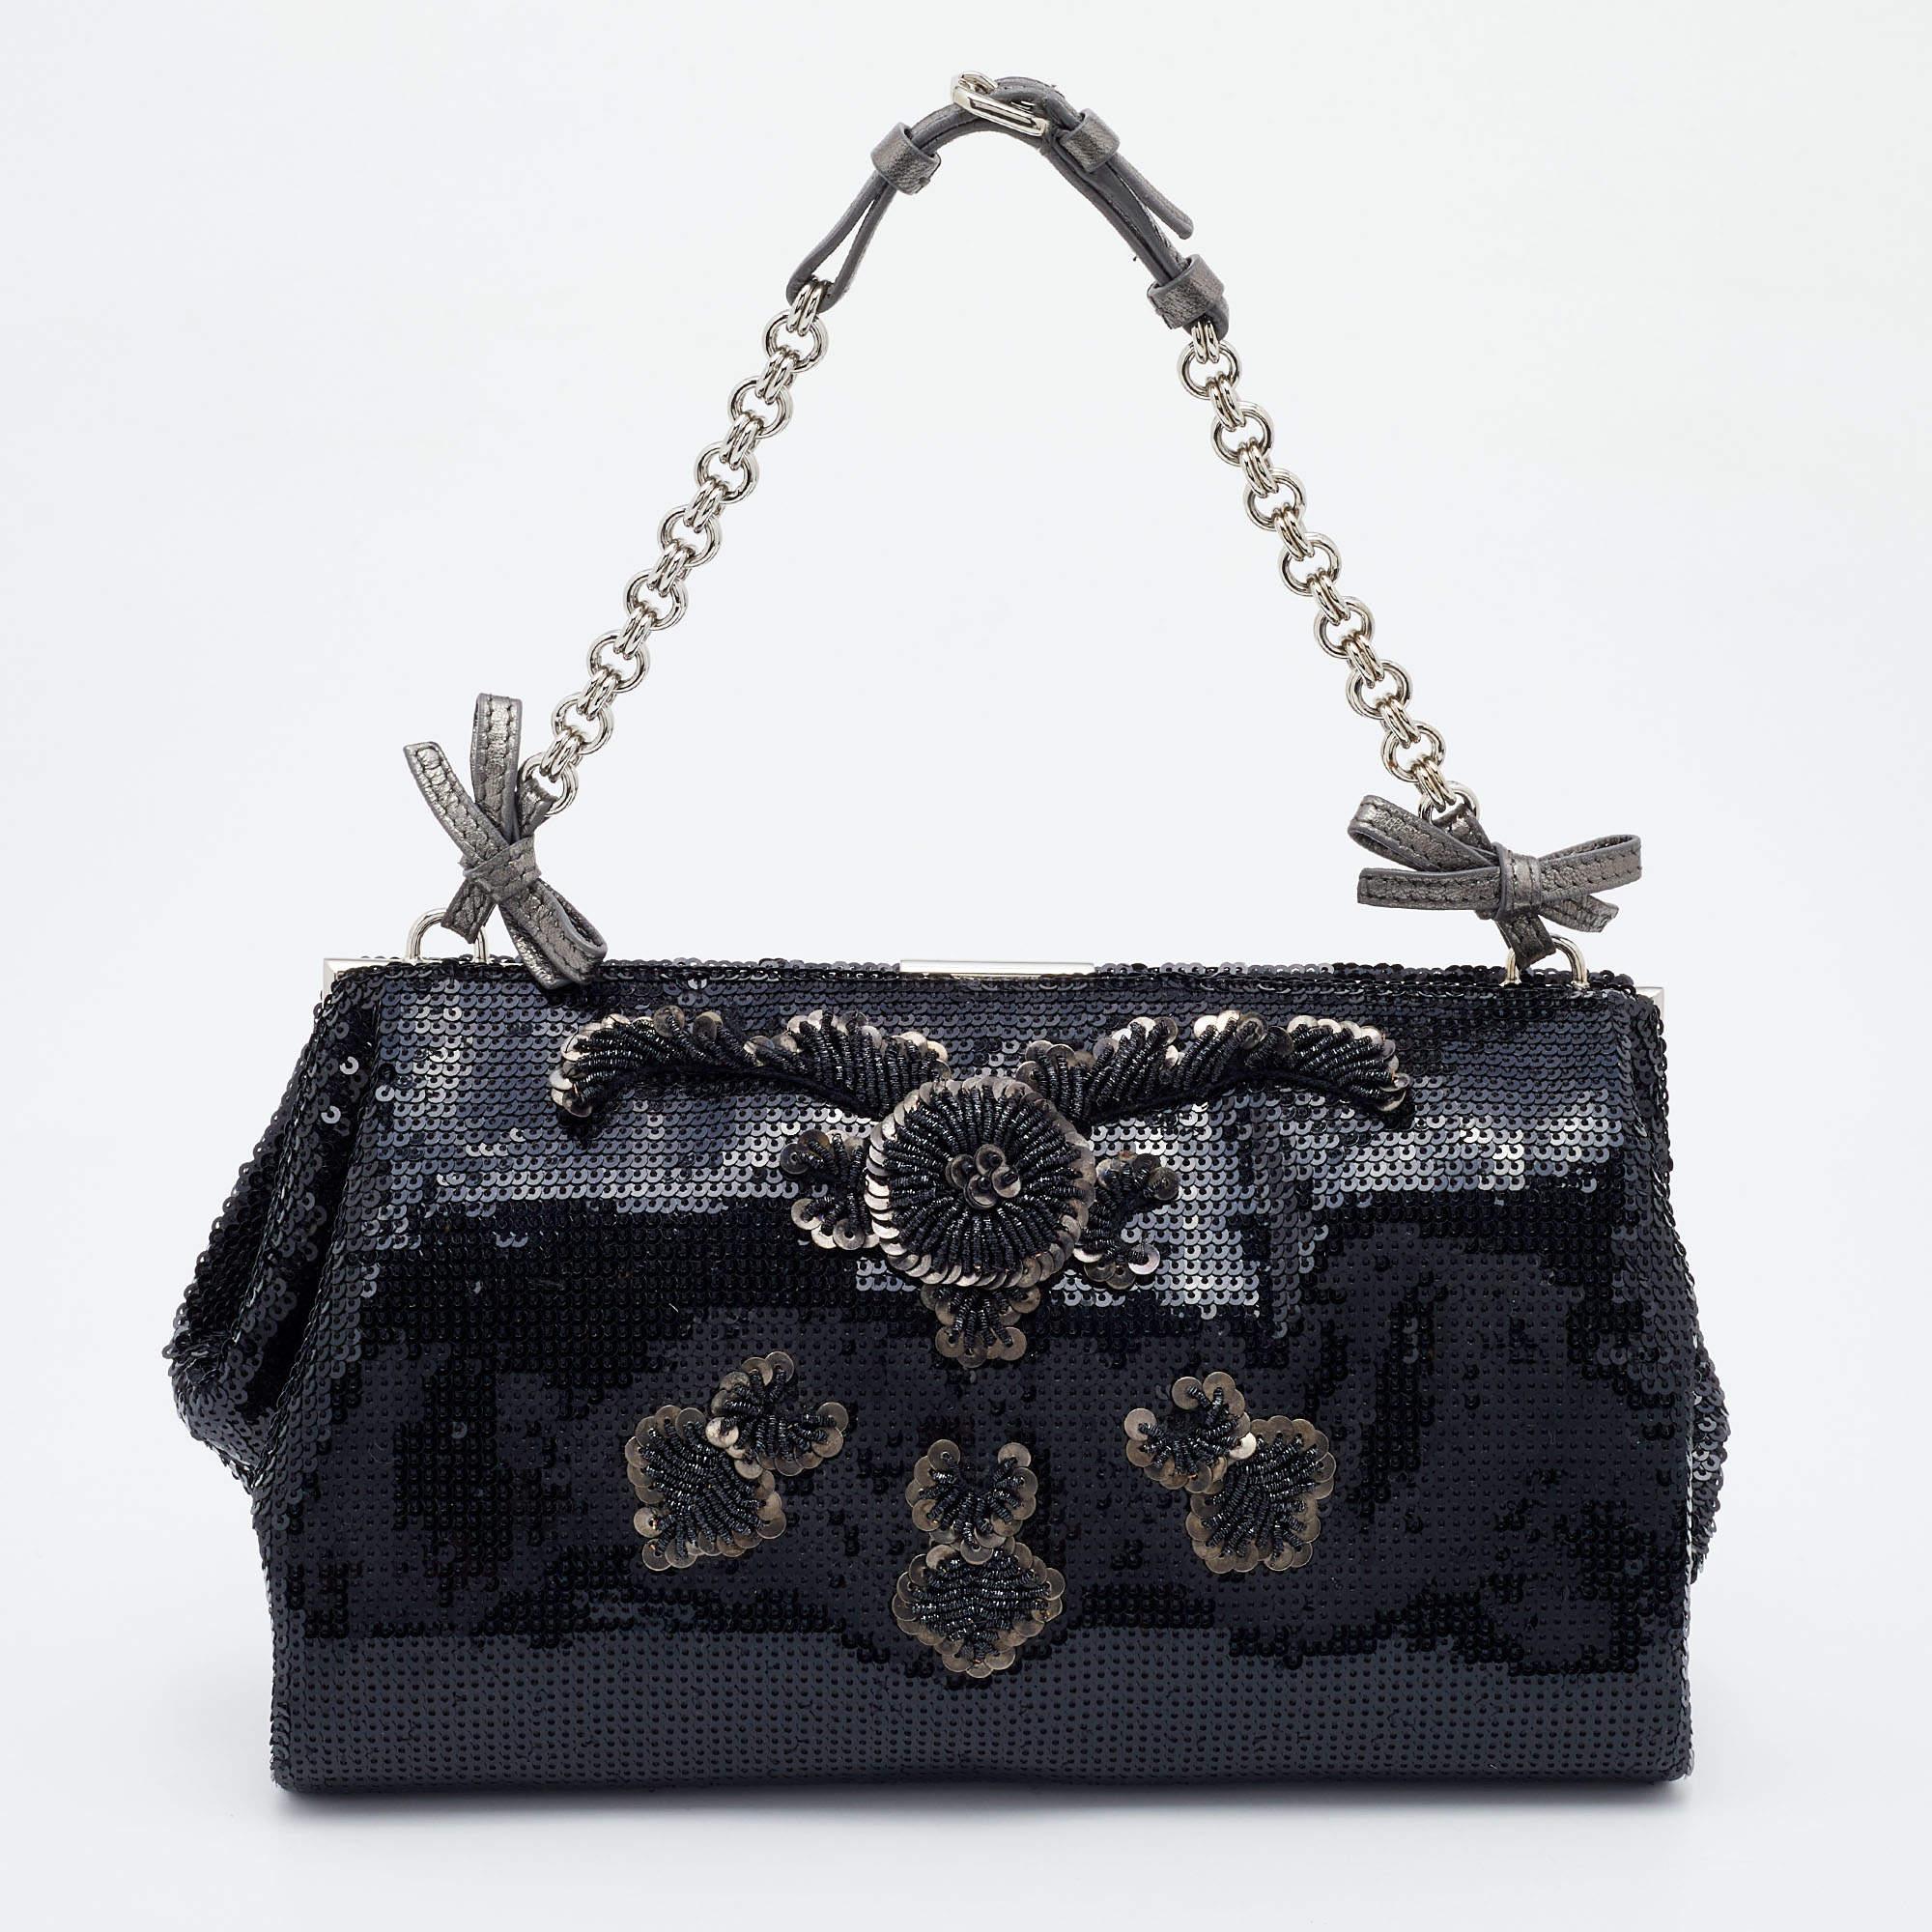 This designer bag is a buy that is worth every bit of your splurge. Exquisitely crafted from the finest materials, it is the perfect piece of luxury to own.

Includes: Original Dustbag

